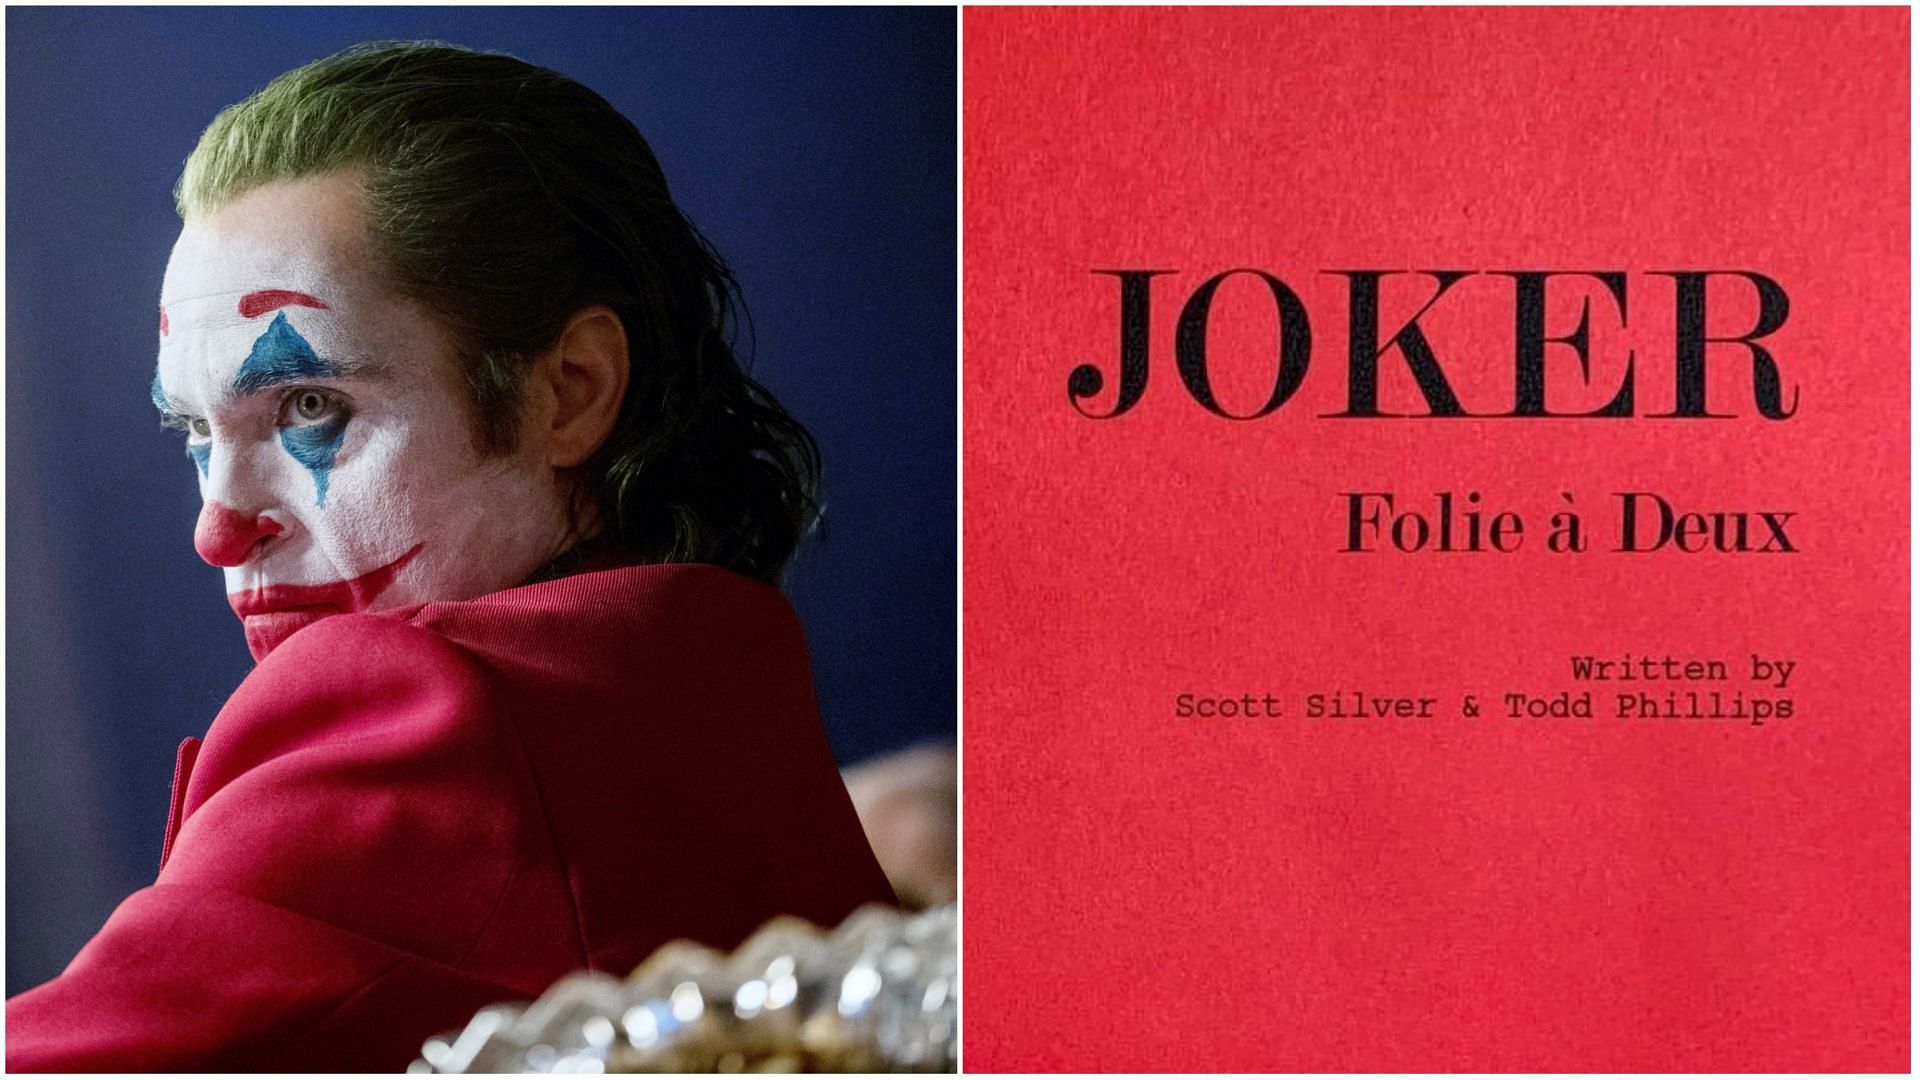 What is Folie à Deux? Joker 2 title confirmed by Todd Phillips and Joaquin Phoenix